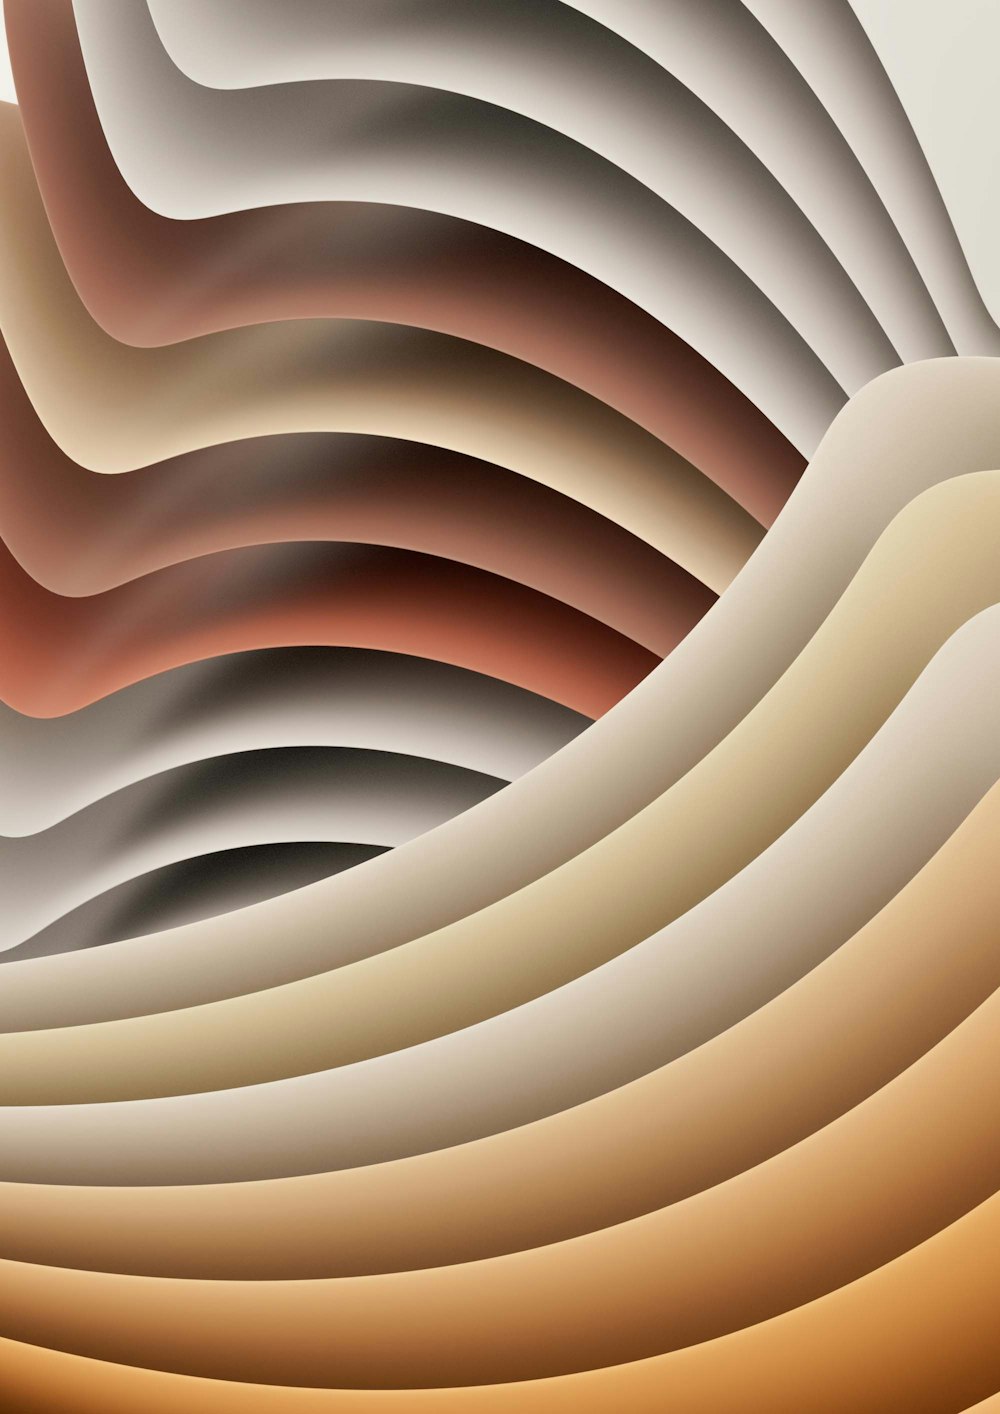 an abstract image of a wave of different colors